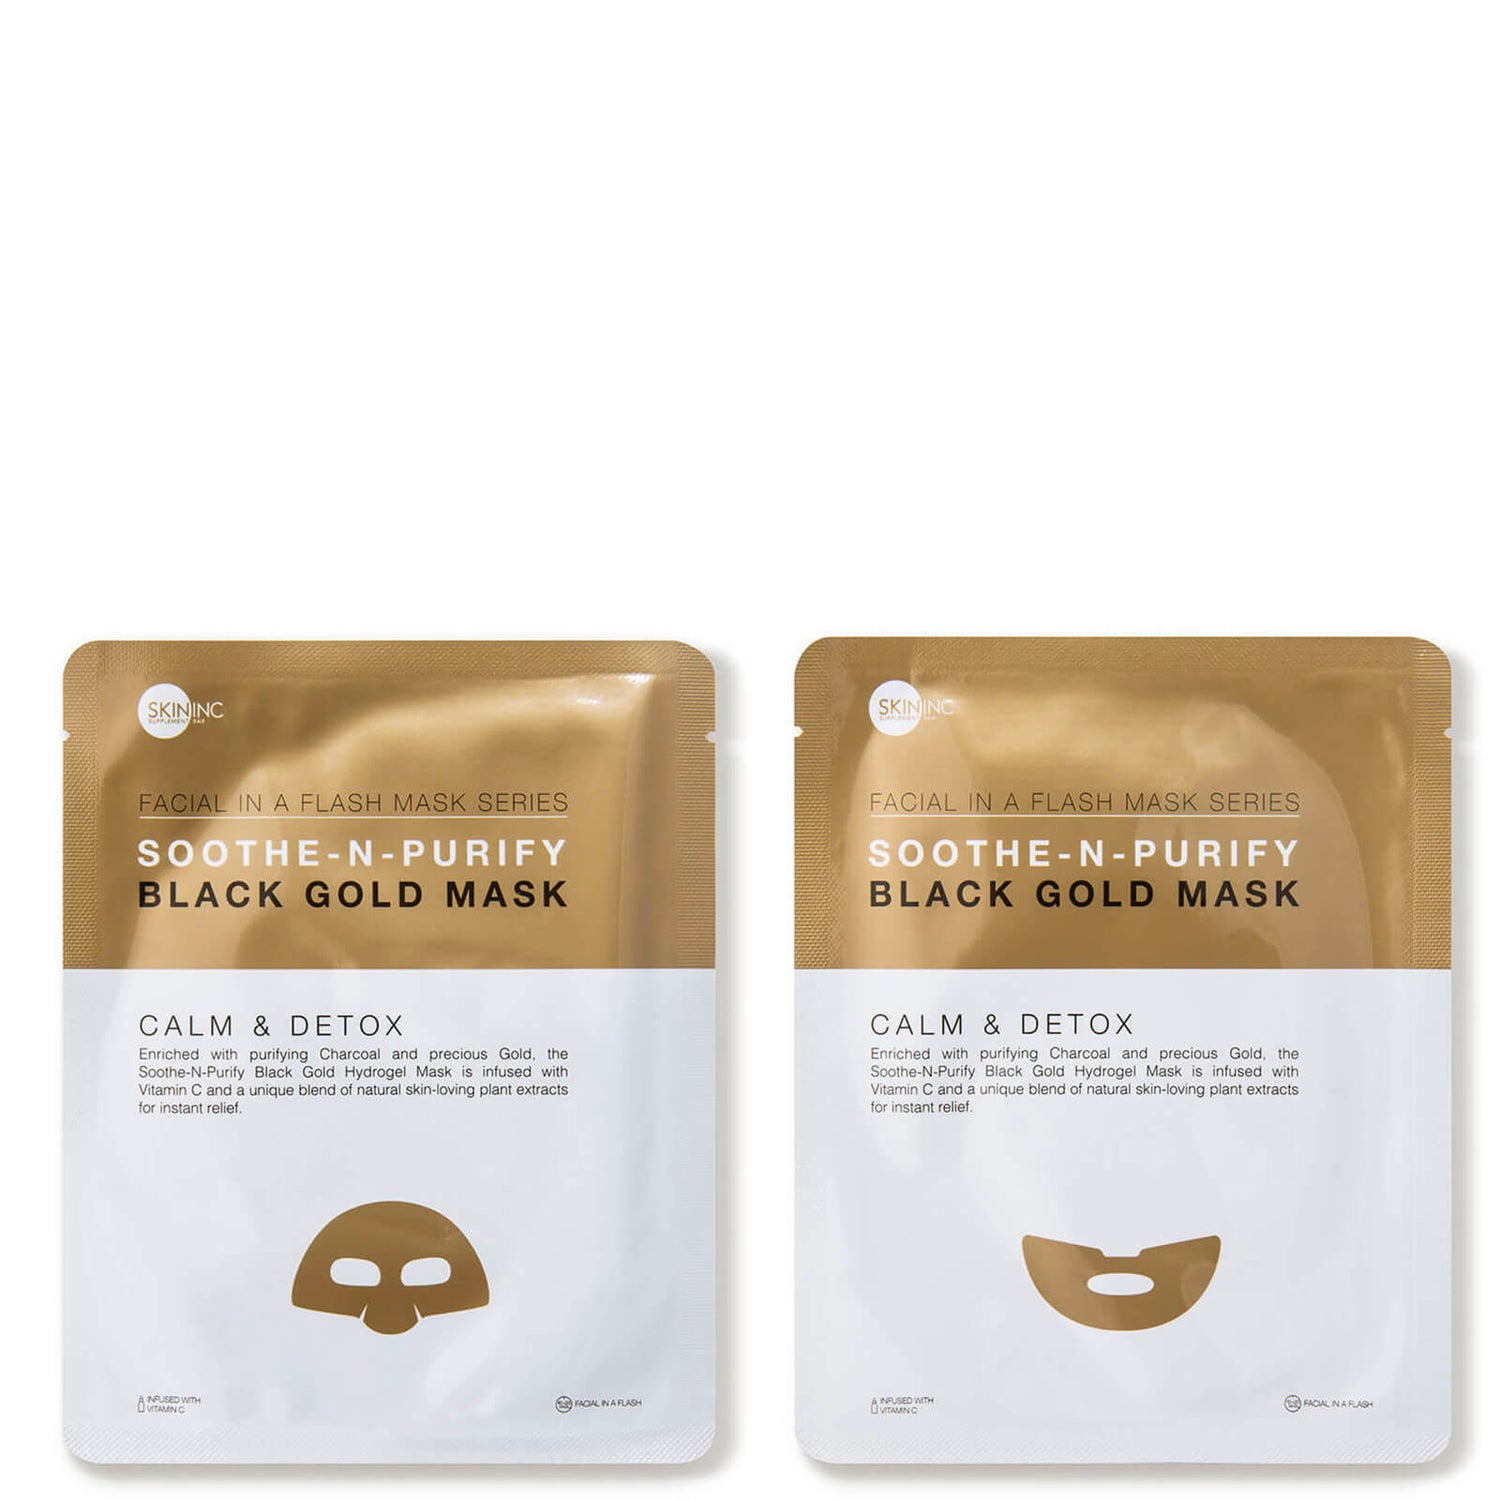 SKIN INC Supplement Bar Soothe-n-Purify Black Gold Mask (3 count)